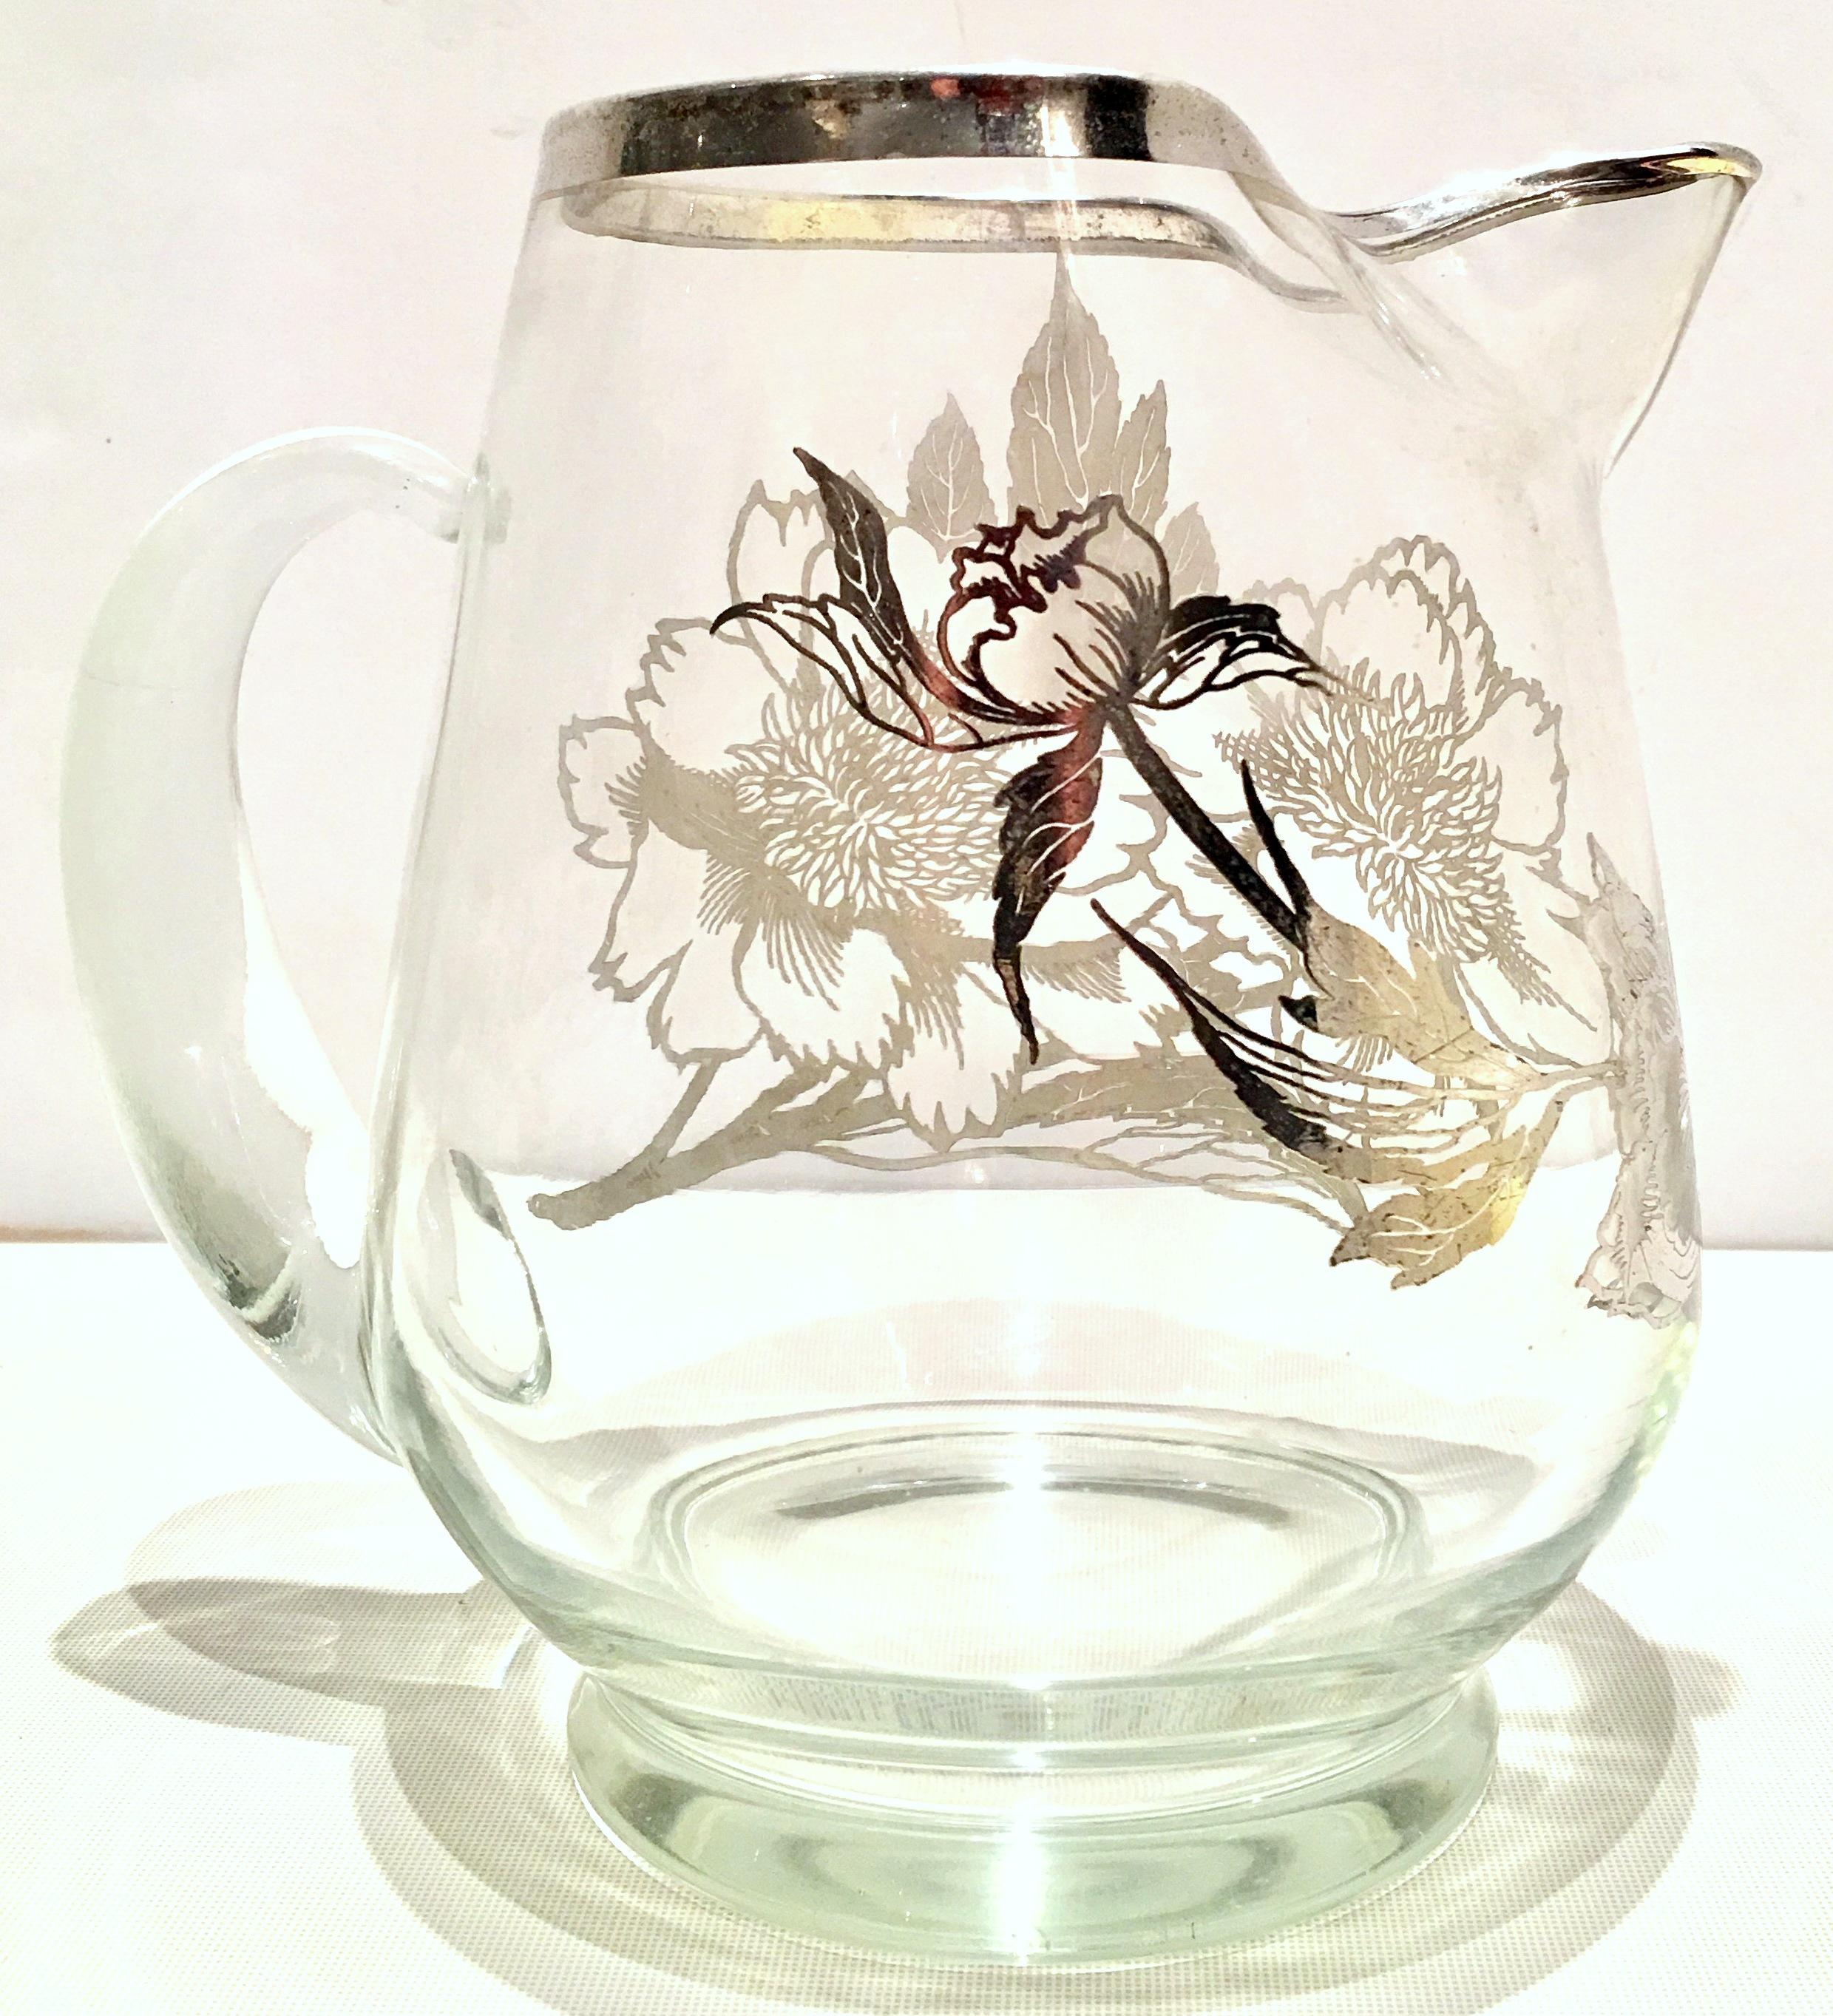 20th Century Modern sterling silver overlay floral motif blown clear b;own glass handled pitcher by, Dorothy Thorpe.